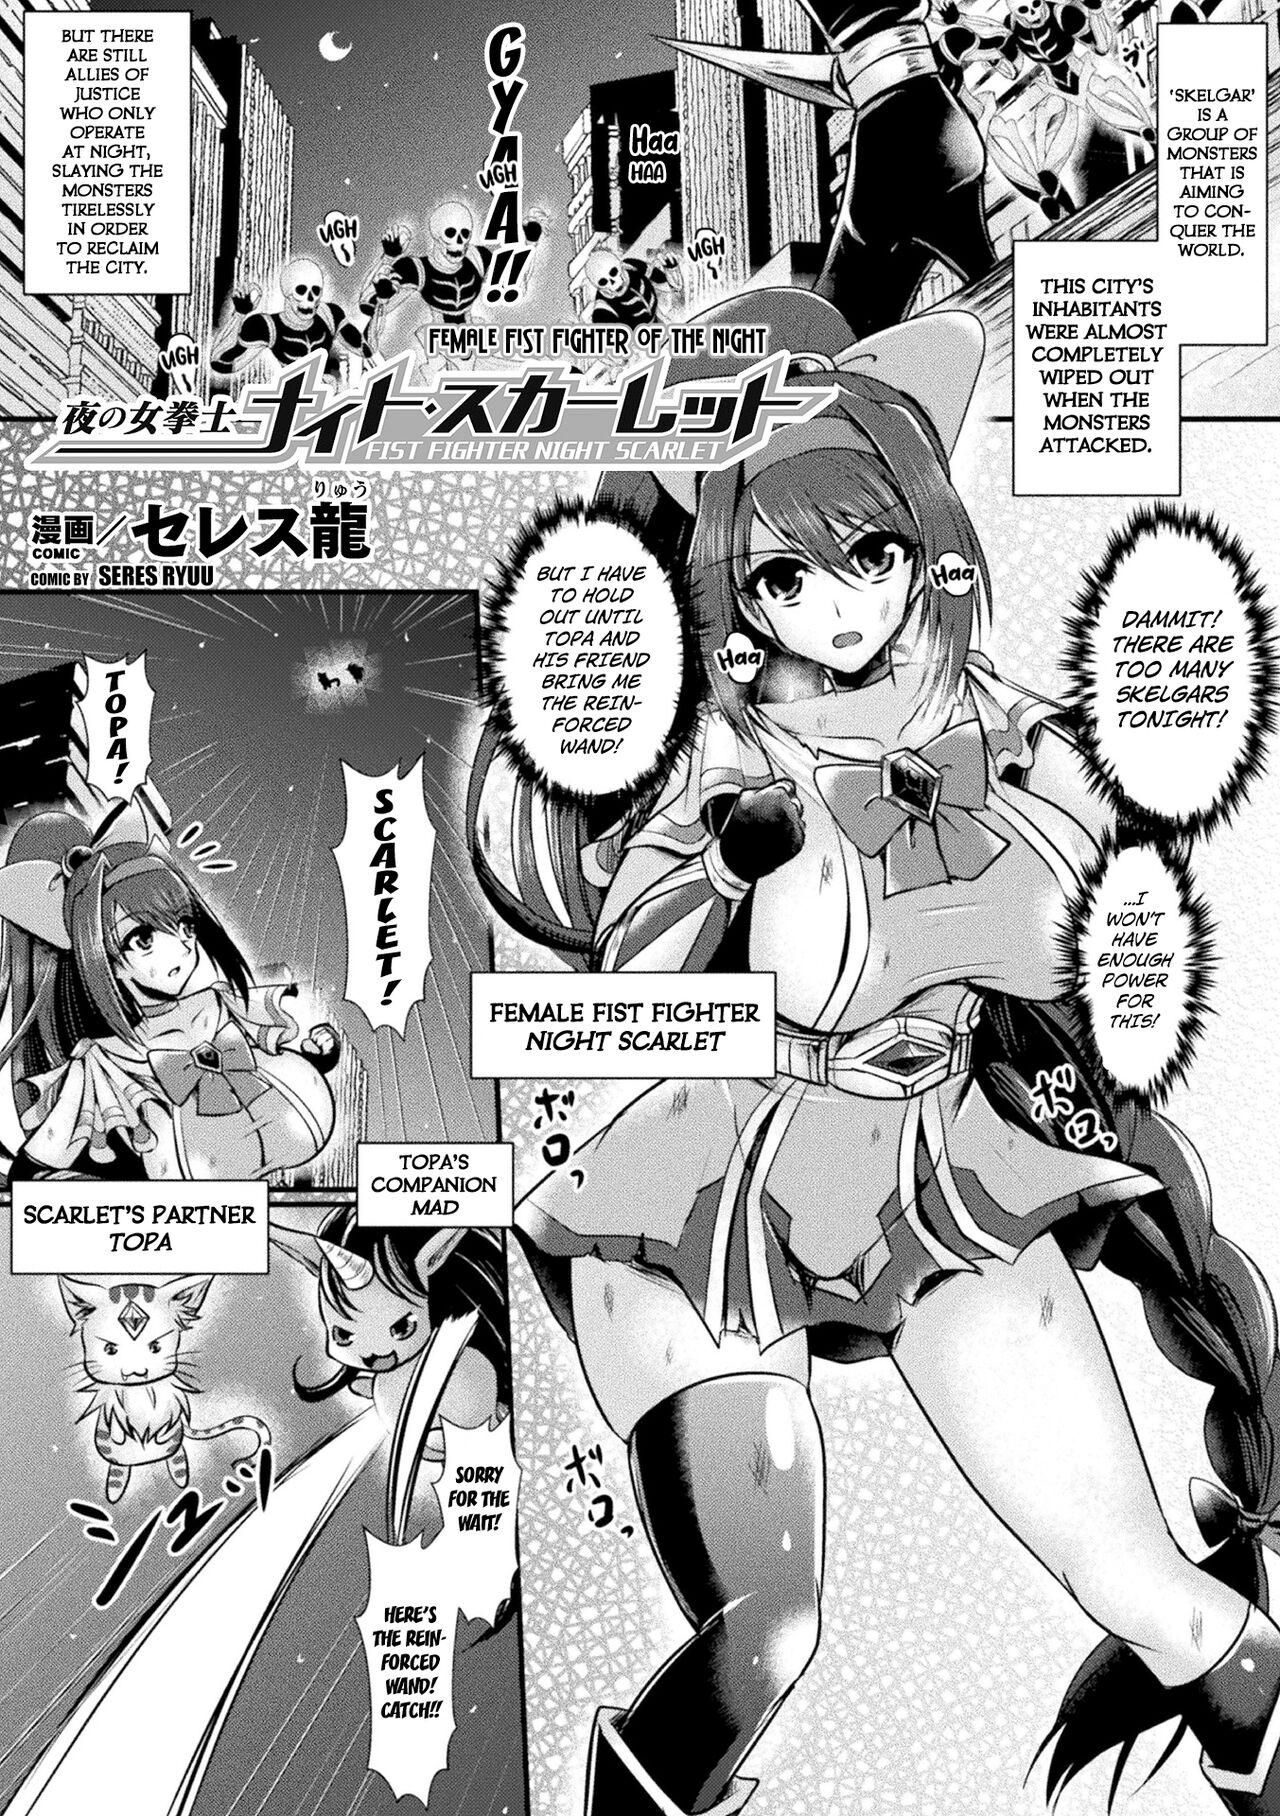 Glasses Yoru no Onna Kenshi Night Scarlet | The Fist Fighter Night Scarlet Anal Porn - Page 1